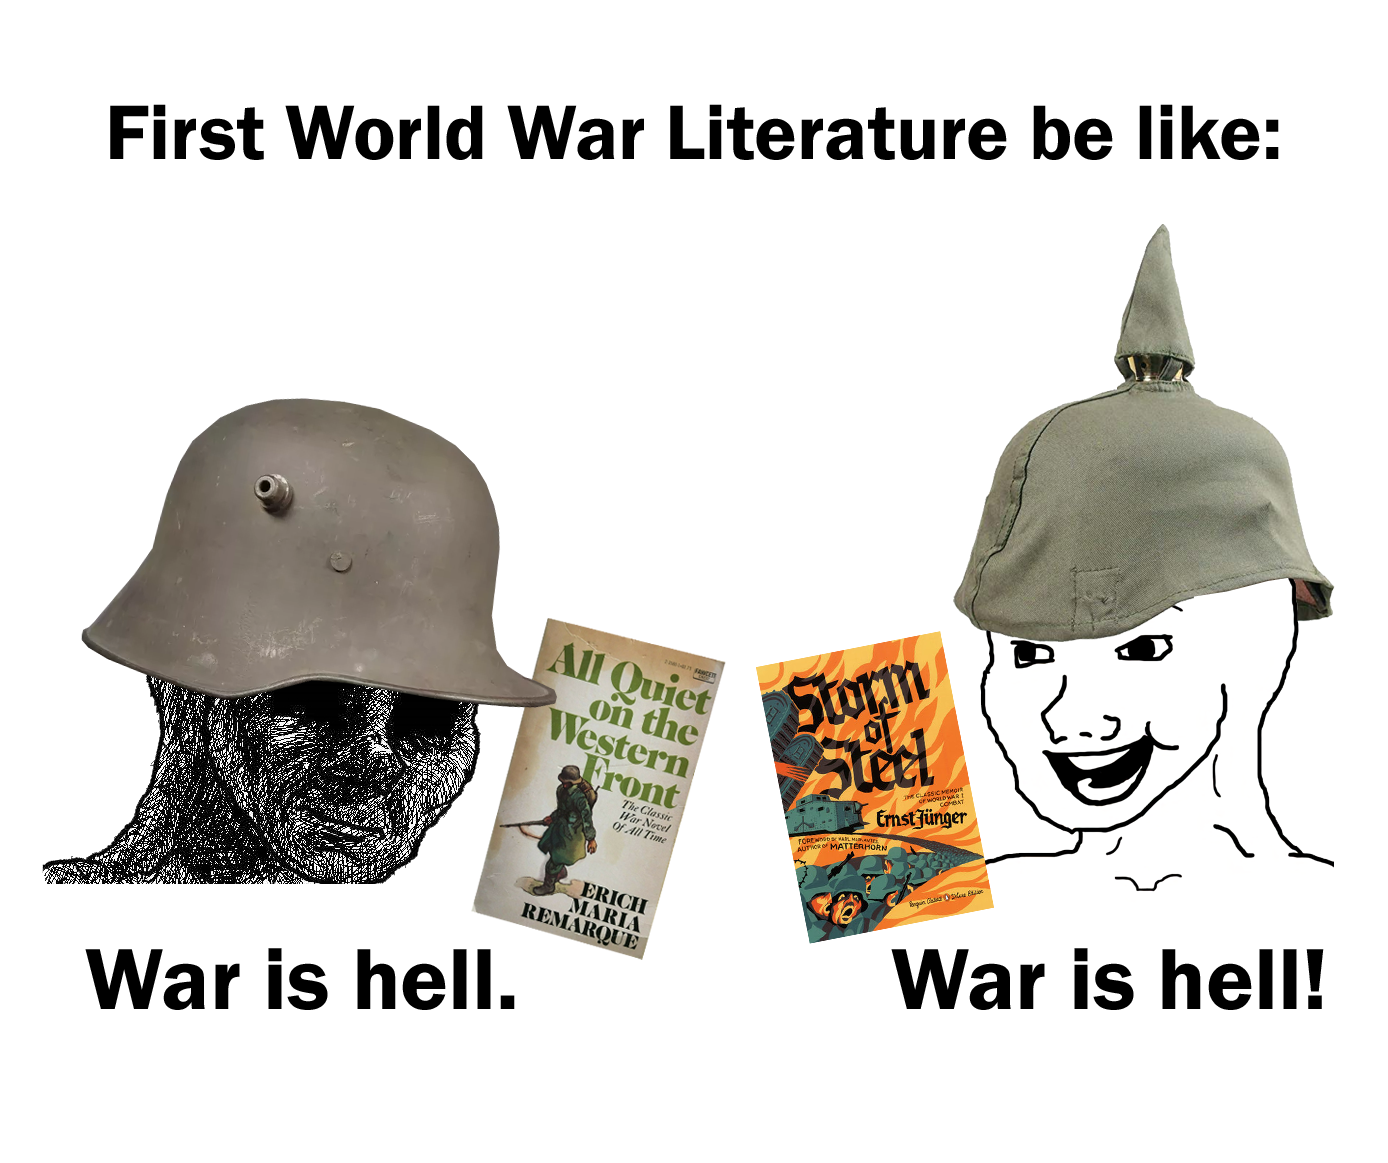 What better way to mark the end of the First World War than a meme about literature?